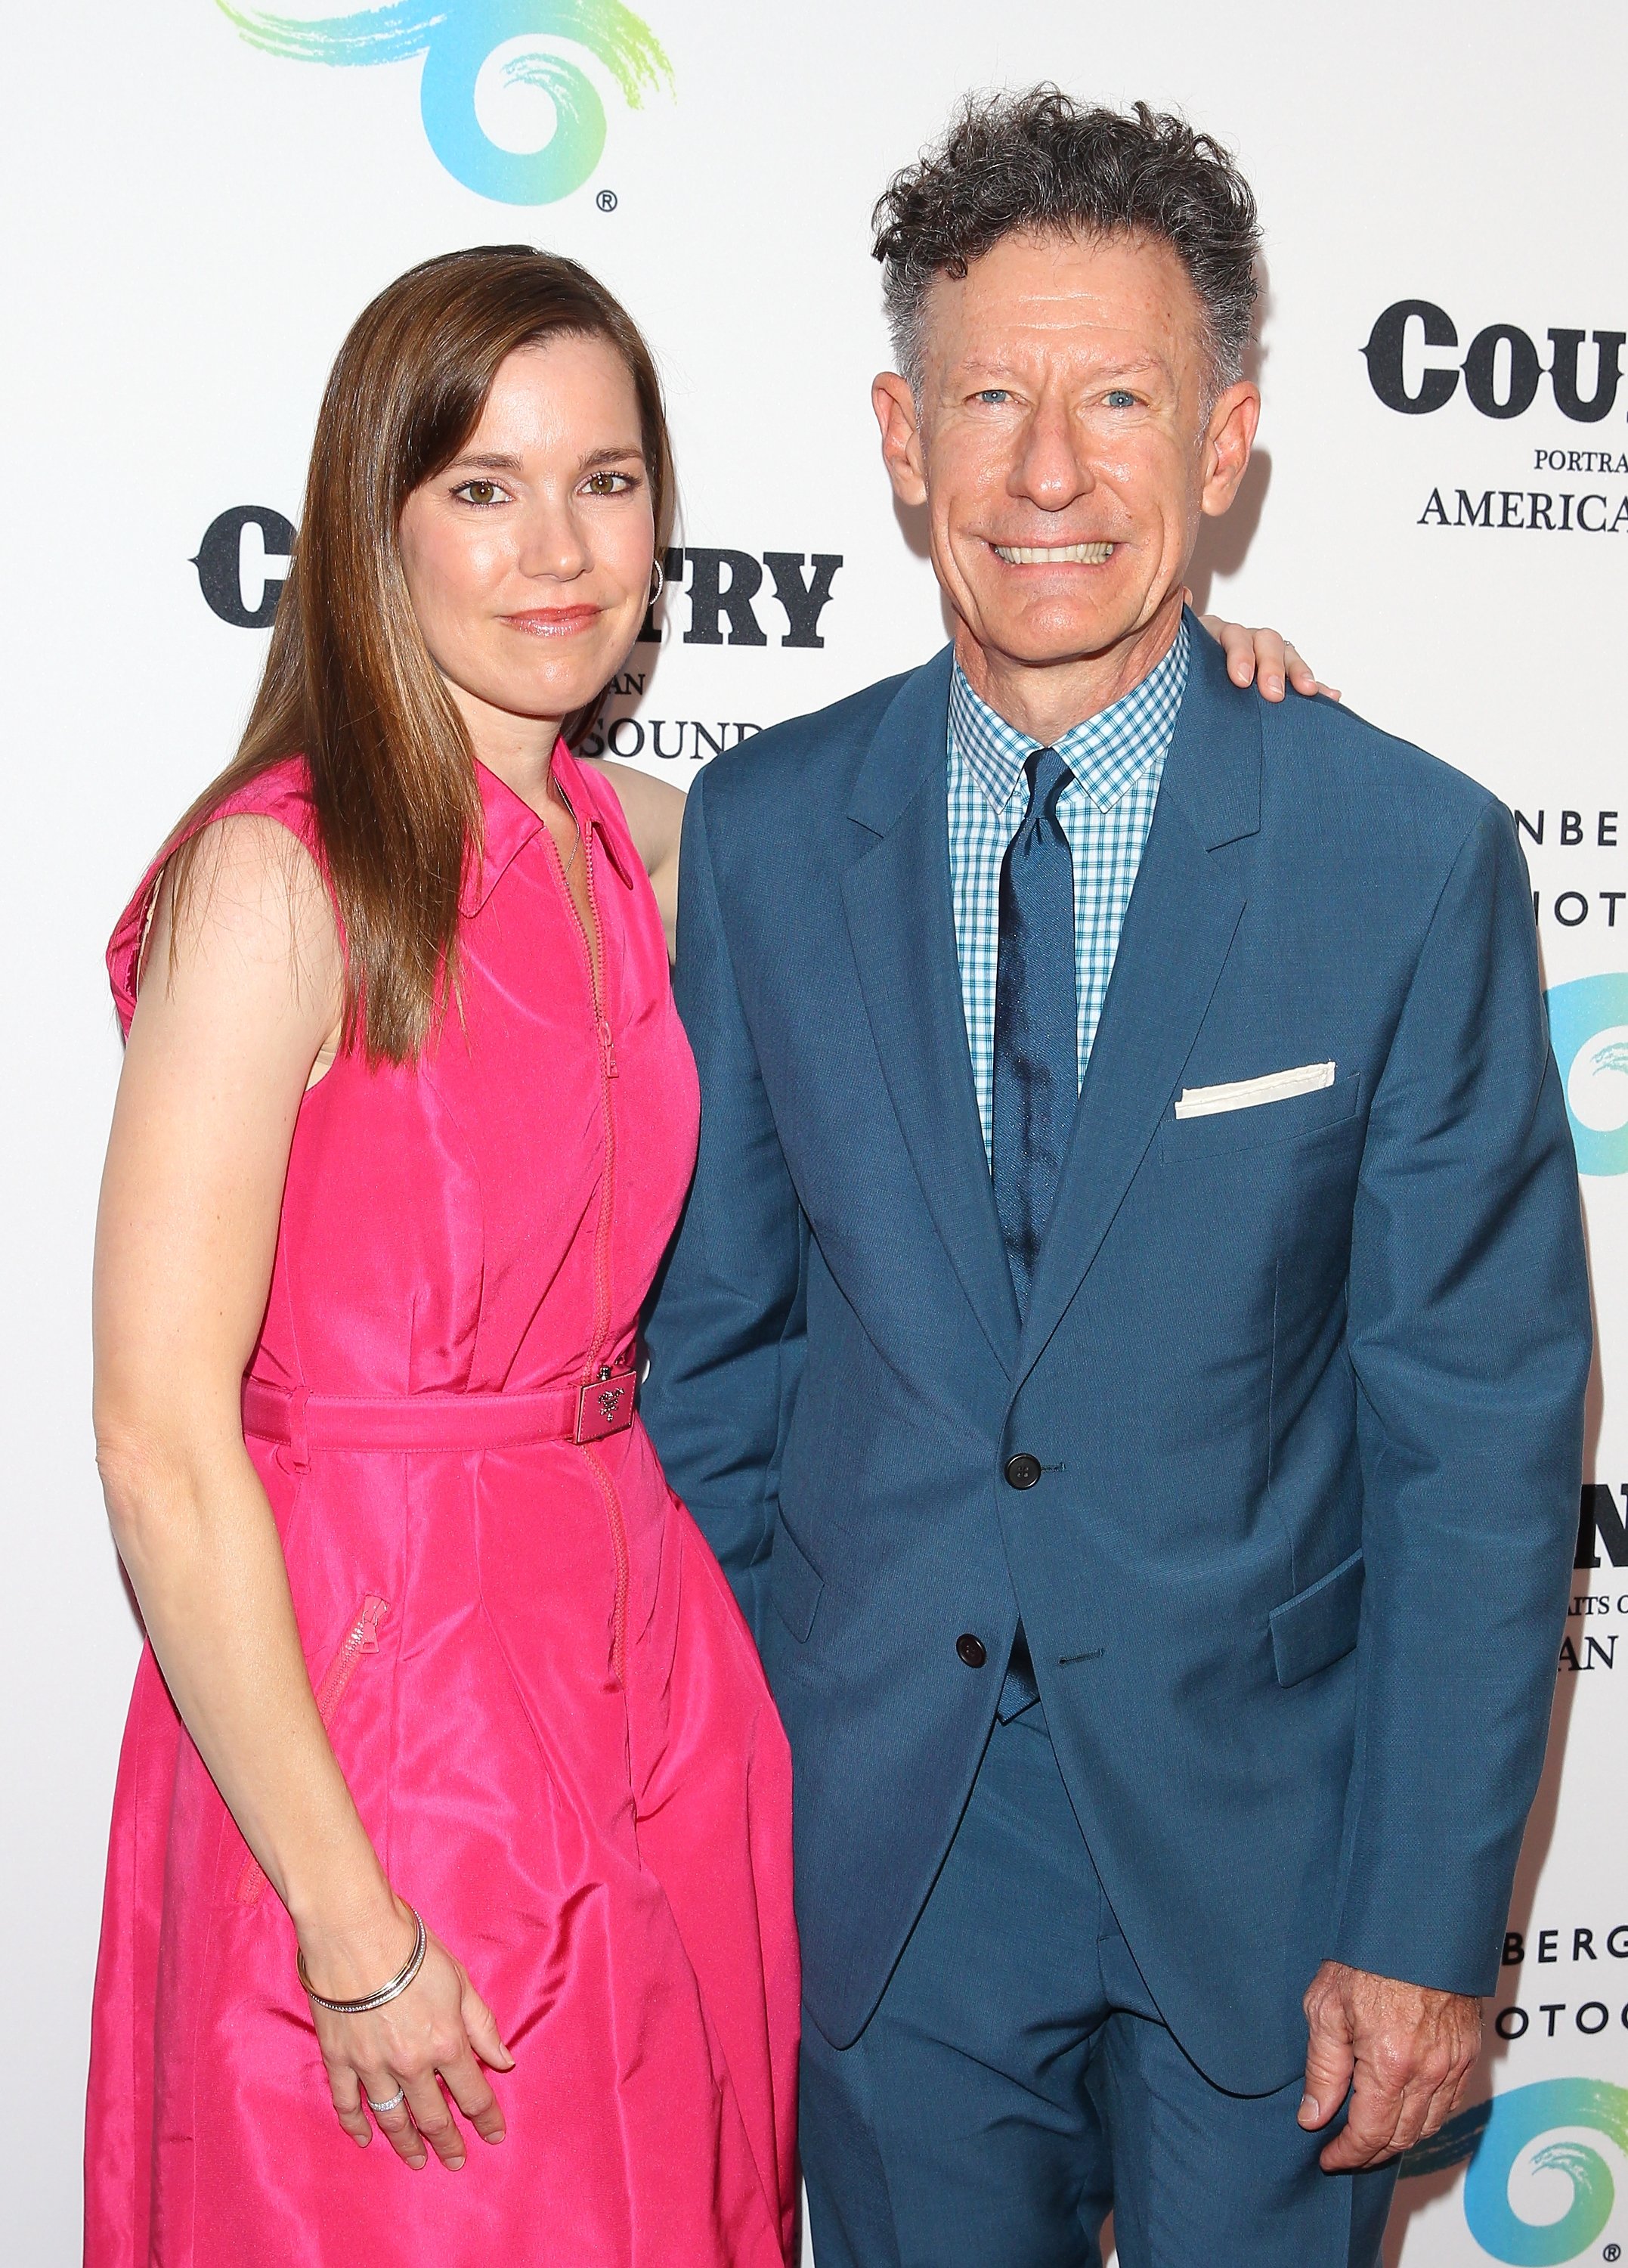 Lyle Lovett and April Kimble during the Annenberg Space for Photography Opening Celebration for "Country, Portraits of an American Sound" at the Annenberg Space for Photography on May 22, 2014 in Century City, California. / Source: Getty Images